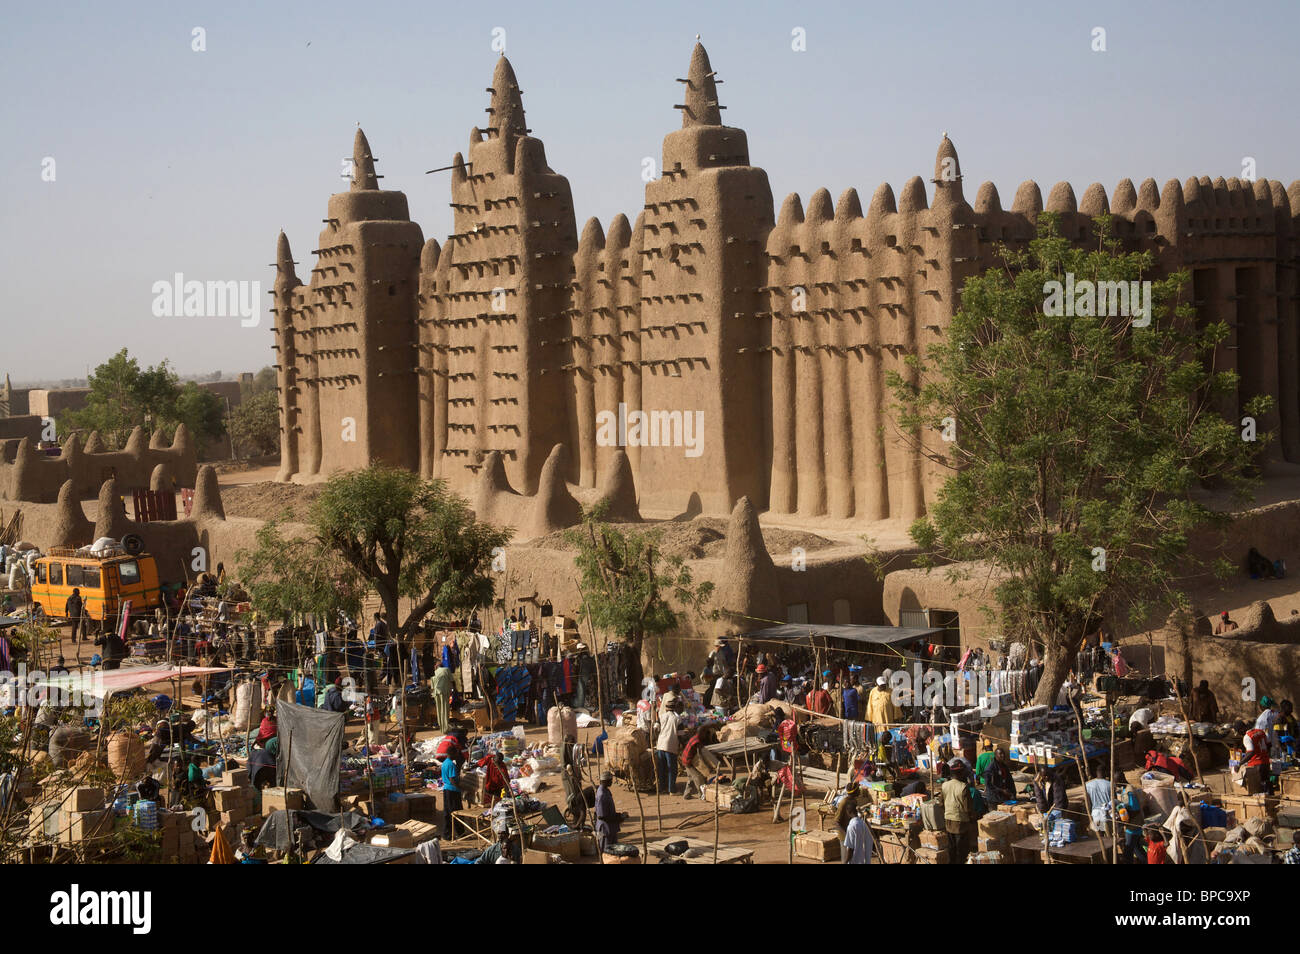 The Monday market infront of the great mud mosque, Djenne, Mali, West Africa Stock Photo